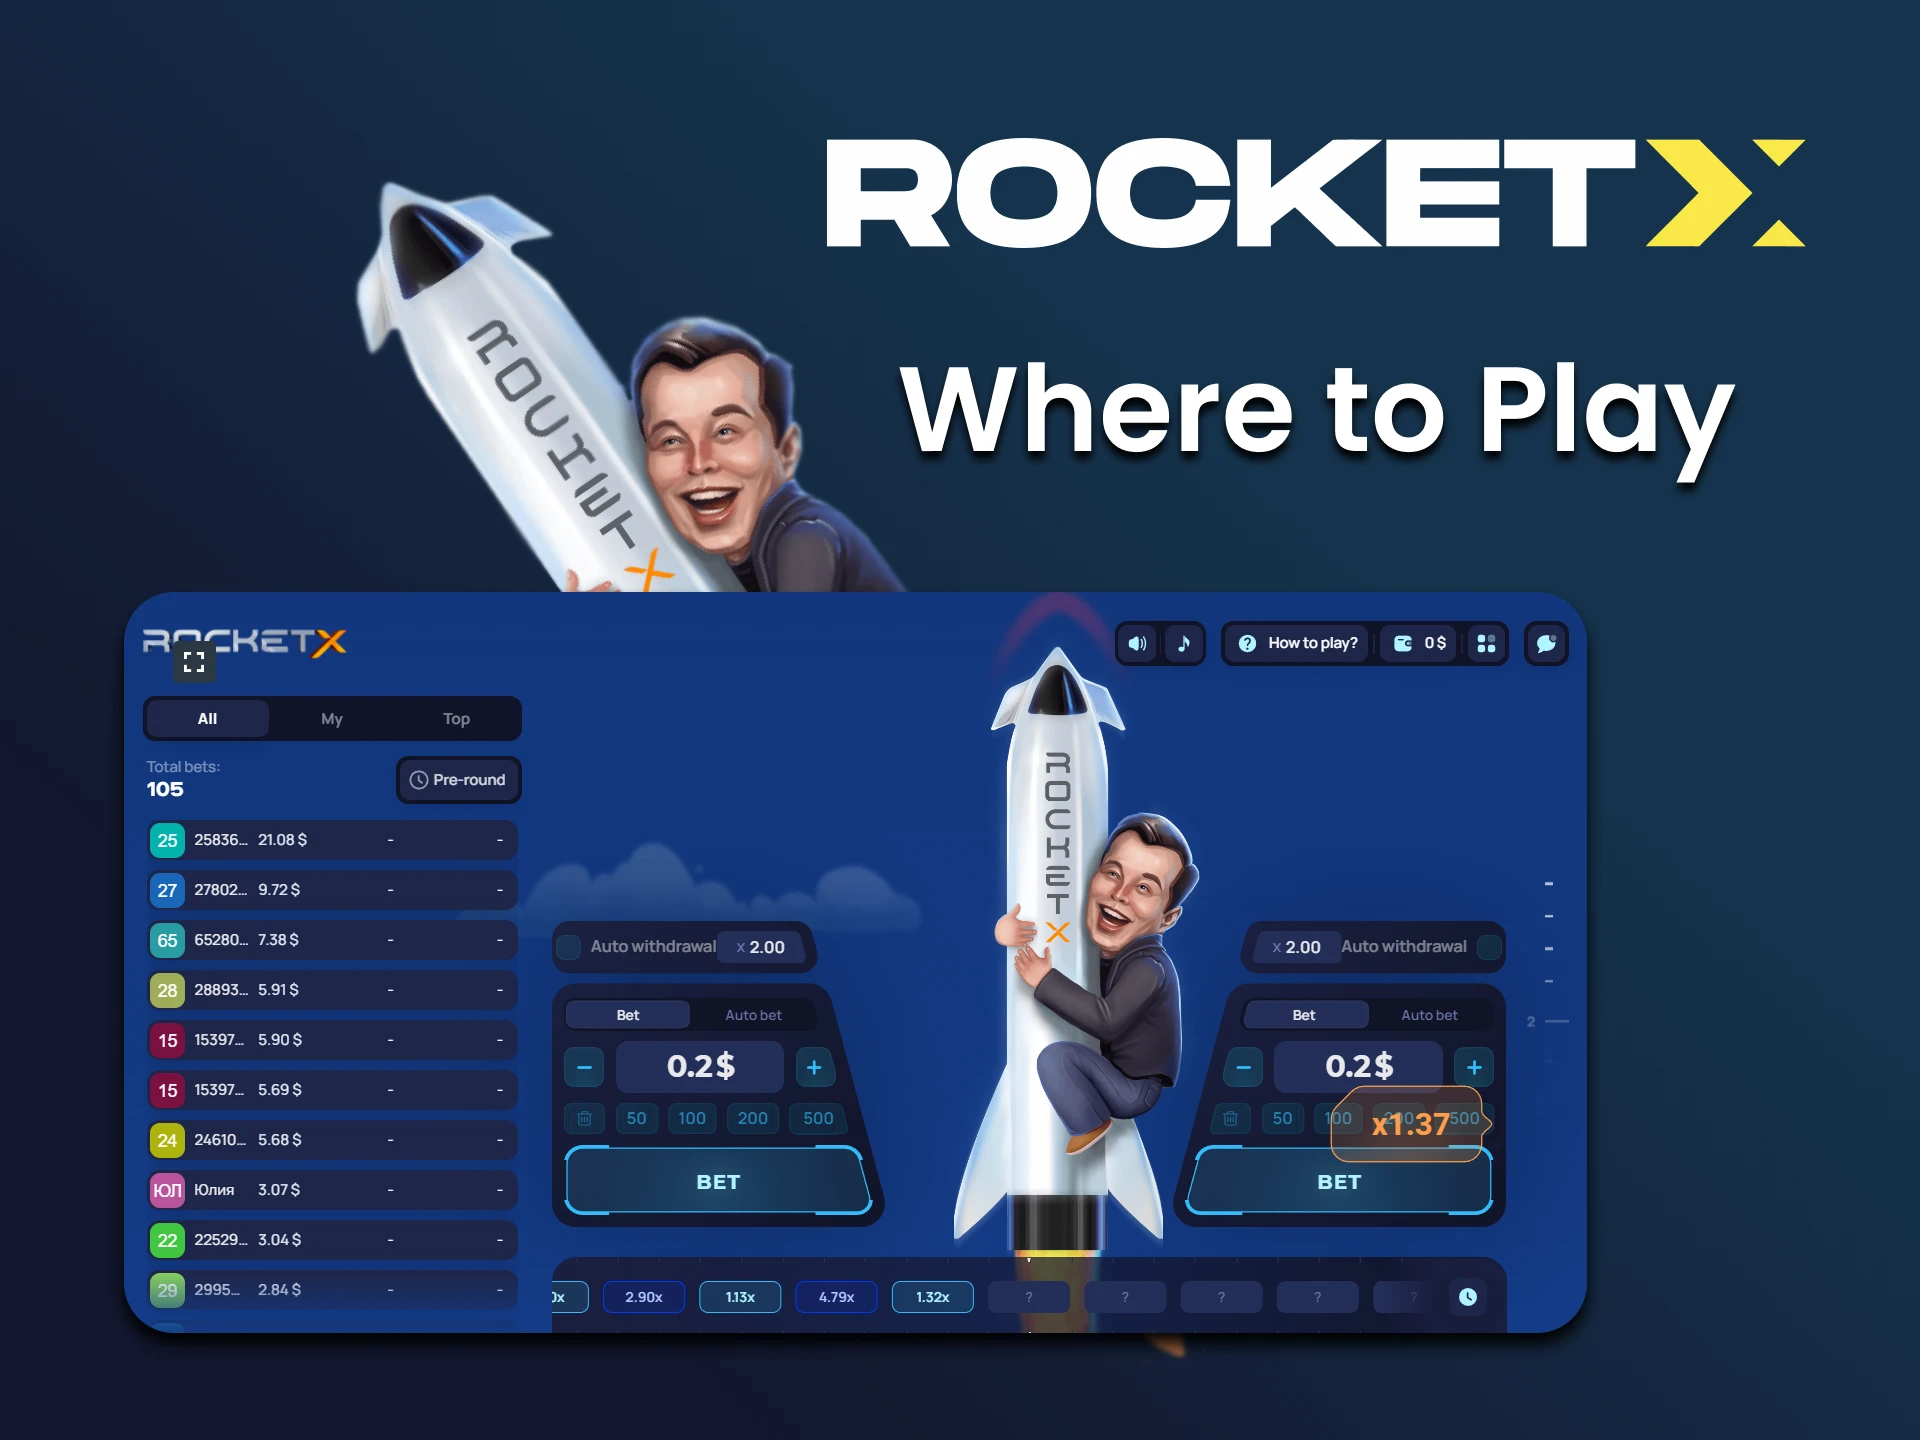 There are many platforms with Rocket X.